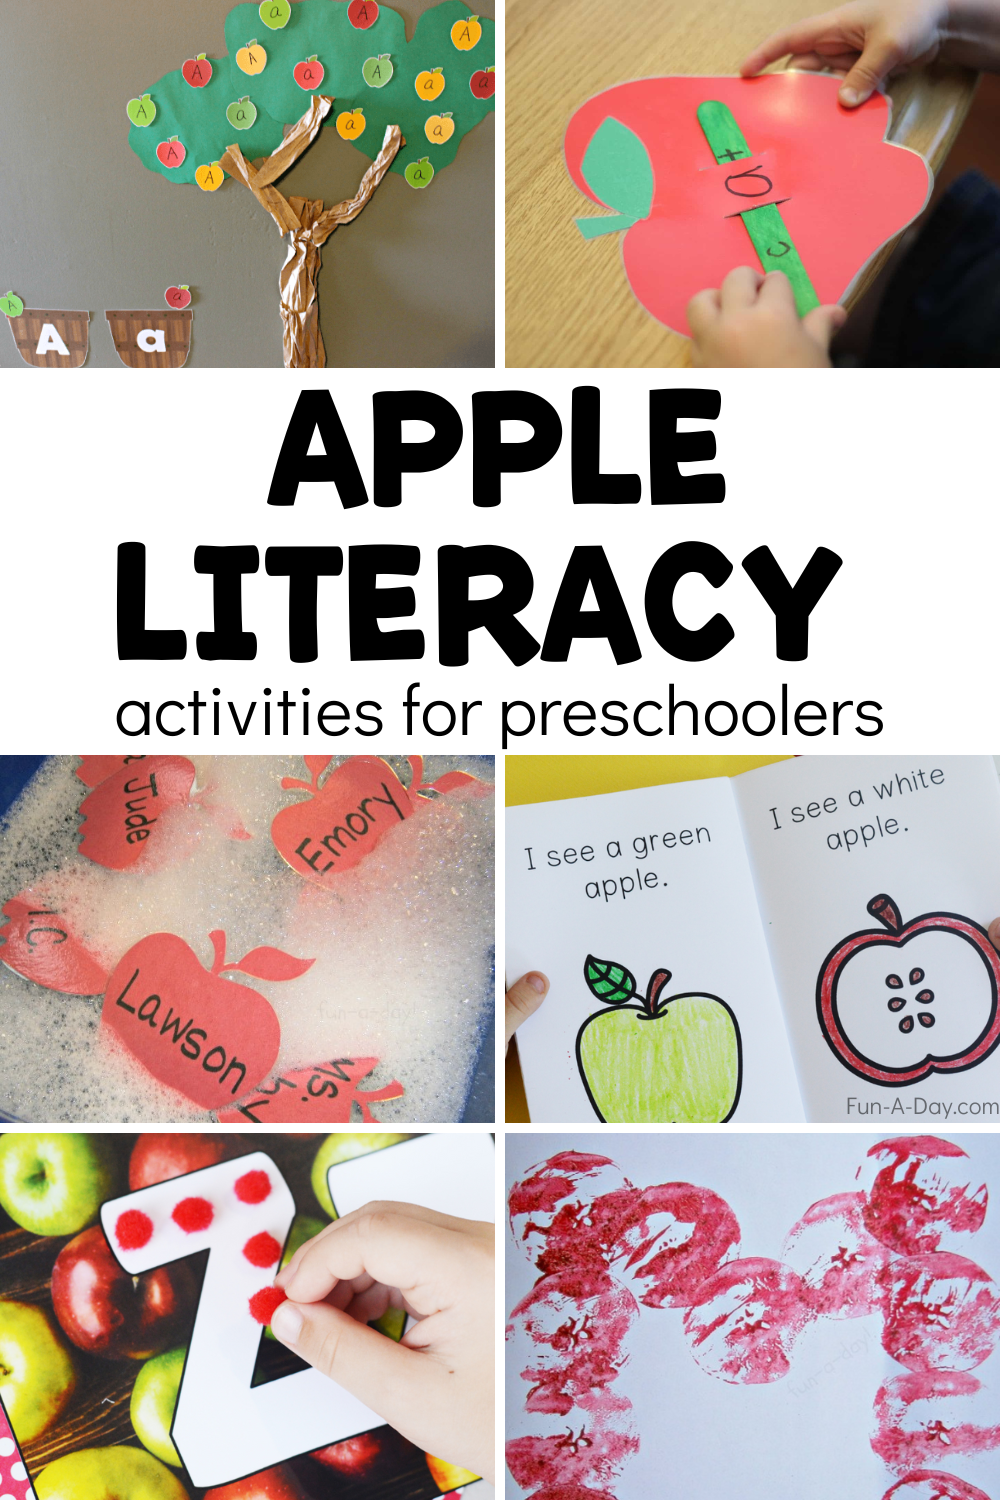 6 apple ideas with text that reads apple literacy activities for preschoolers